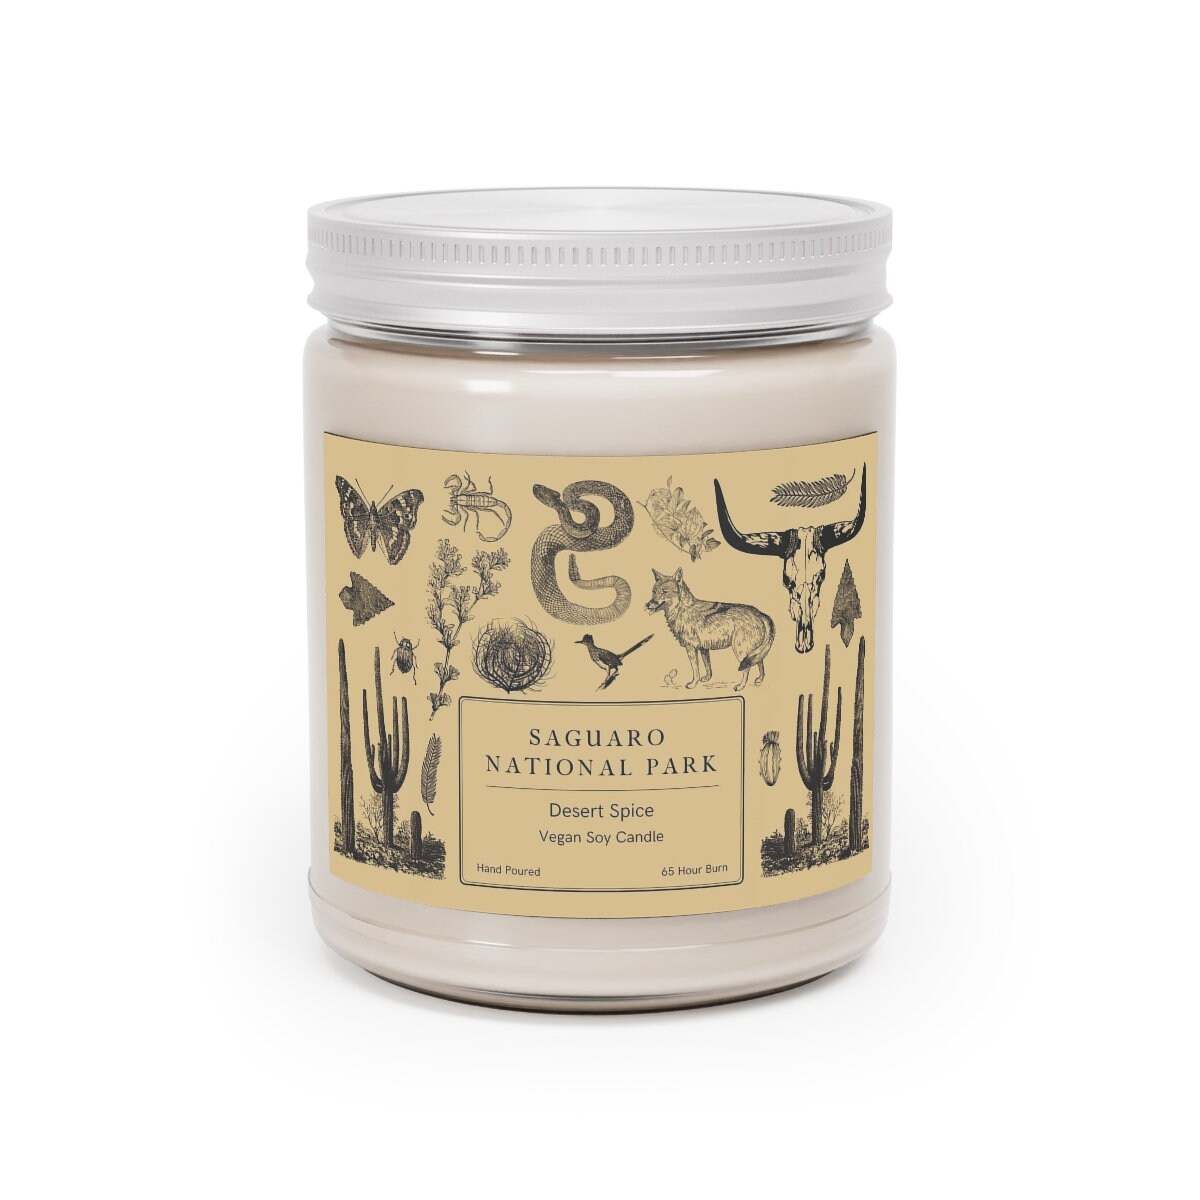 Saguaro National Park Hand-Poured Soy CandleThe Saguaro National Park Desert Spice scented candle comes in 9 oz jars and brings the desert breeze and blooms of Saguaro National Park into your home.
Details:
- 